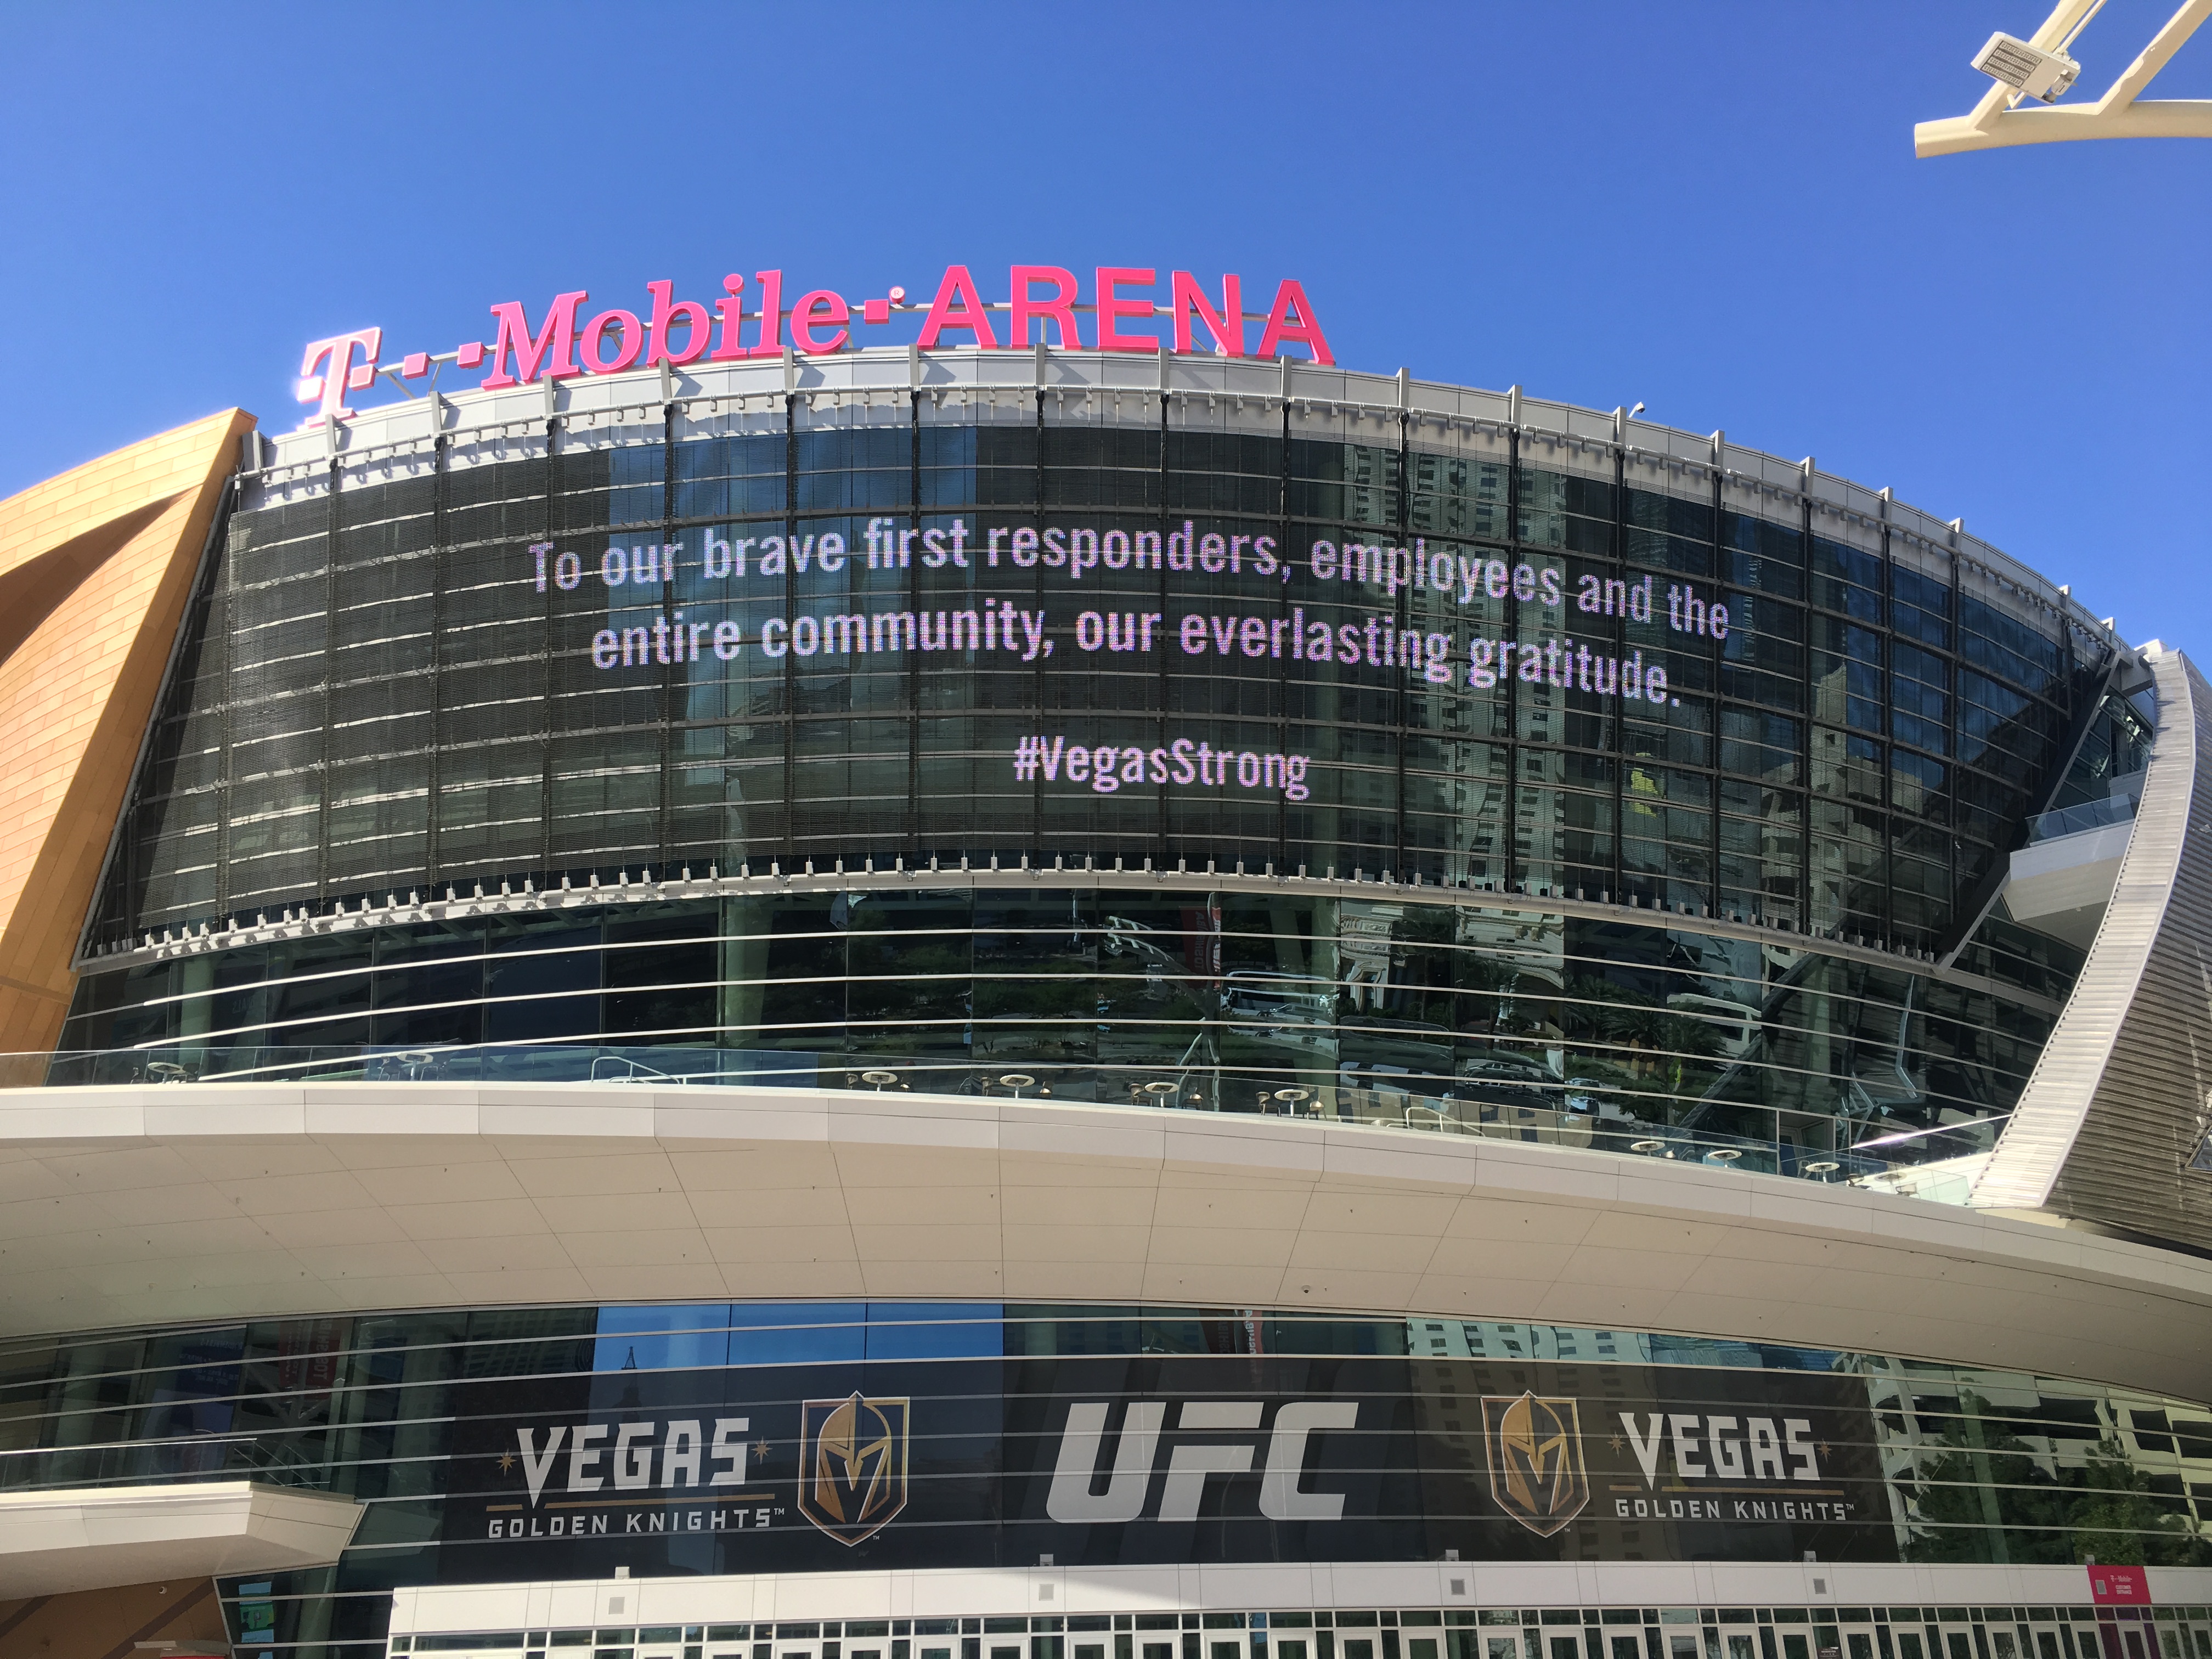 Las Vegas to Host 2022 NHL All Star Weekend at T-Mobile Arena